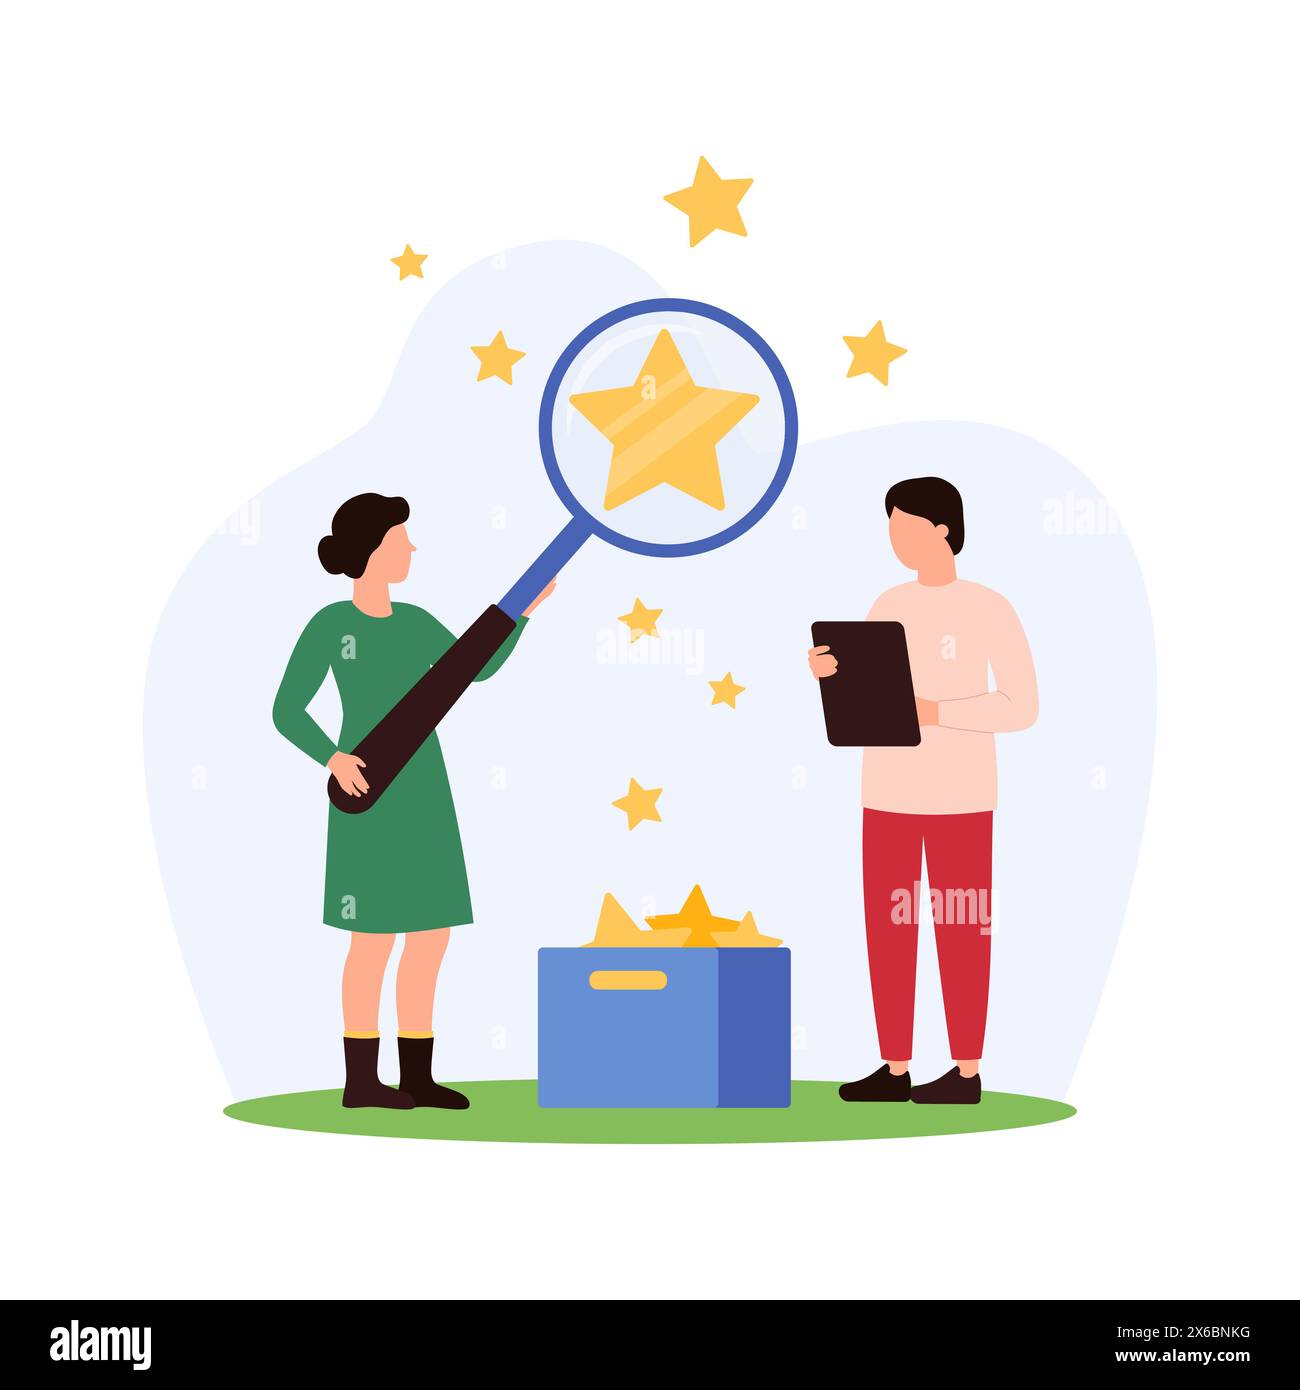 Customer review, comparison of user opinions, satisfaction and experiences about product. Tiny people looking through magnifying glass at golden stars flying out of box cartoon vector illustration Stock Vector